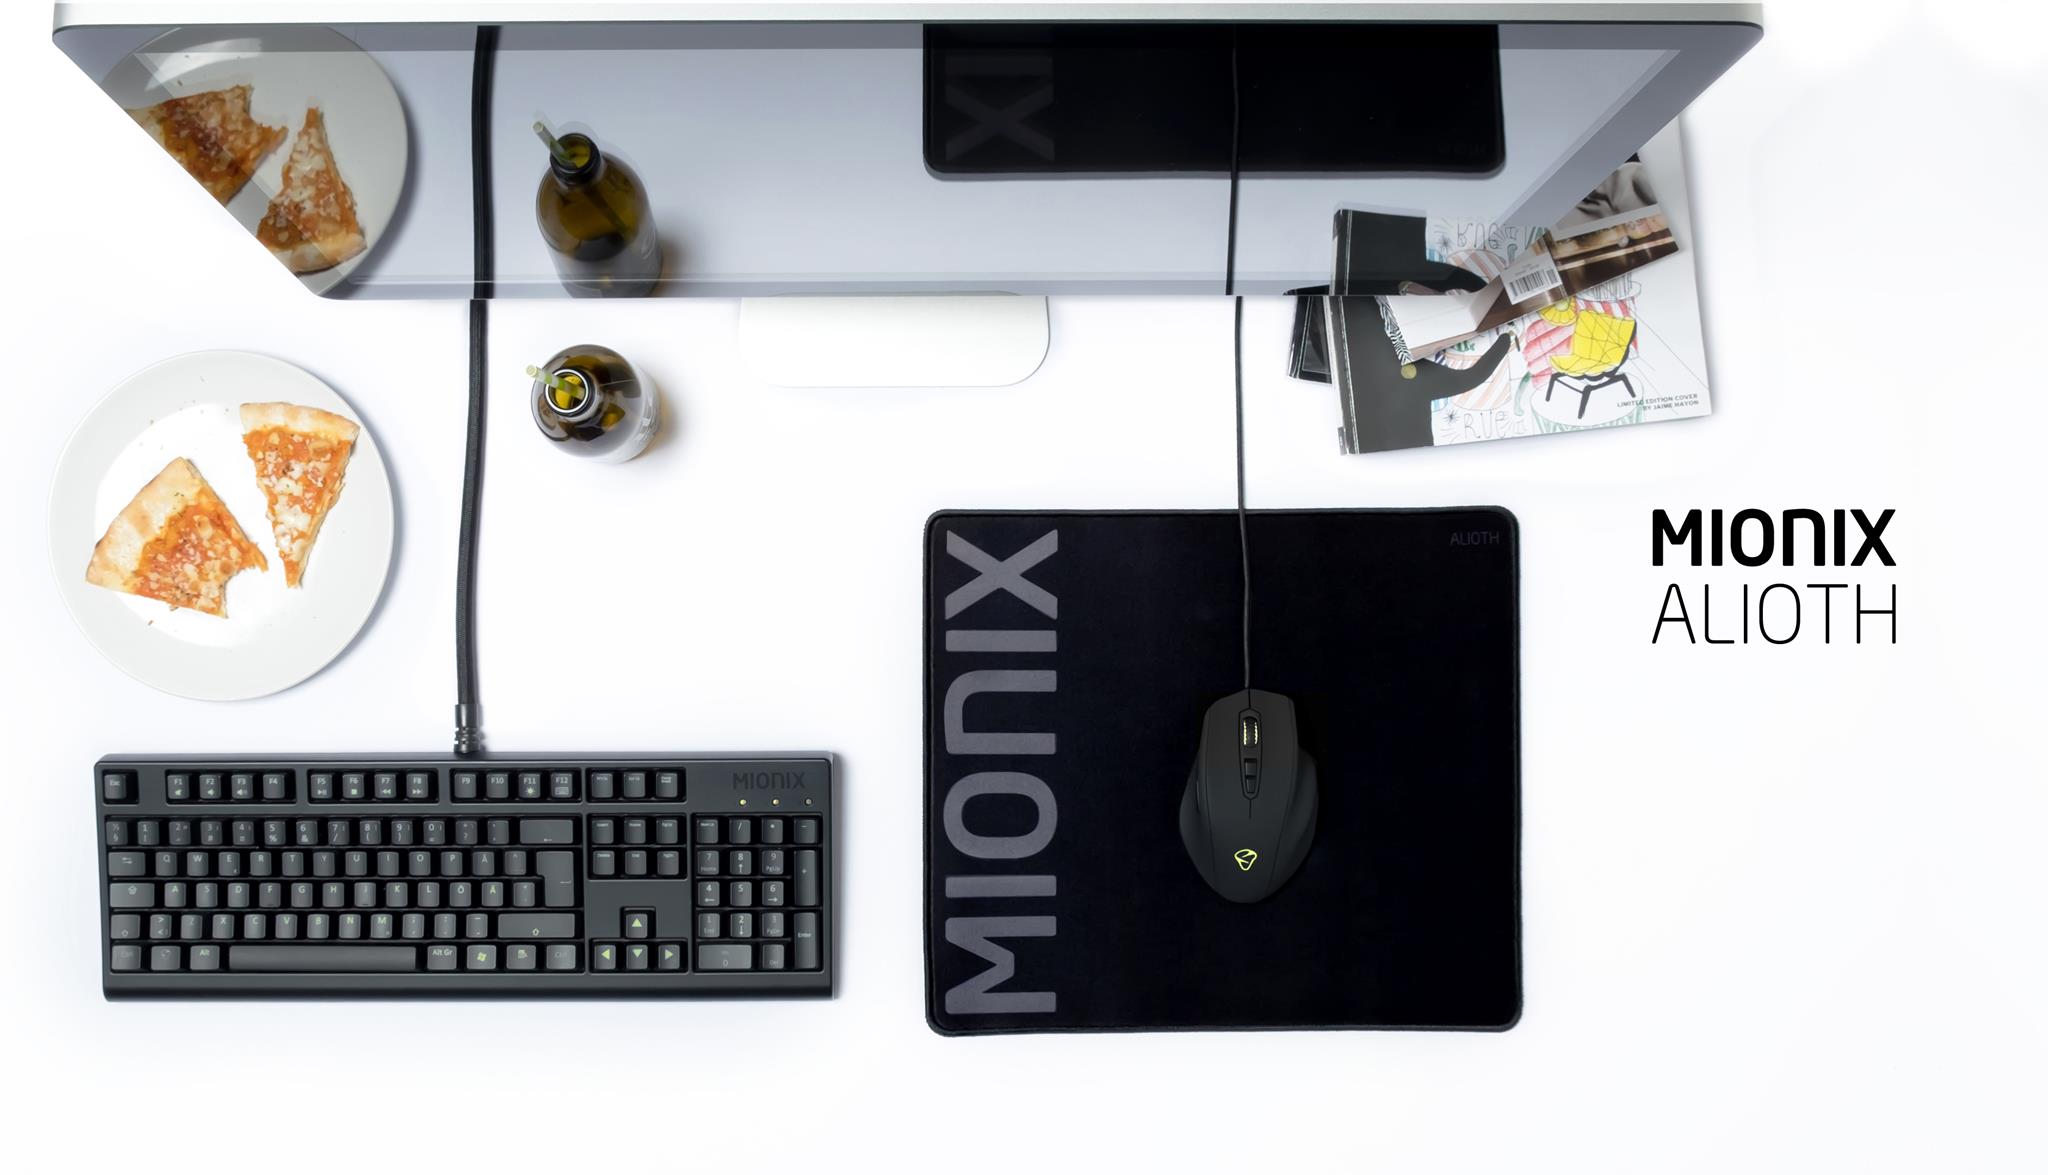 Meet The New Mionix ALIOTH Mouse Pad